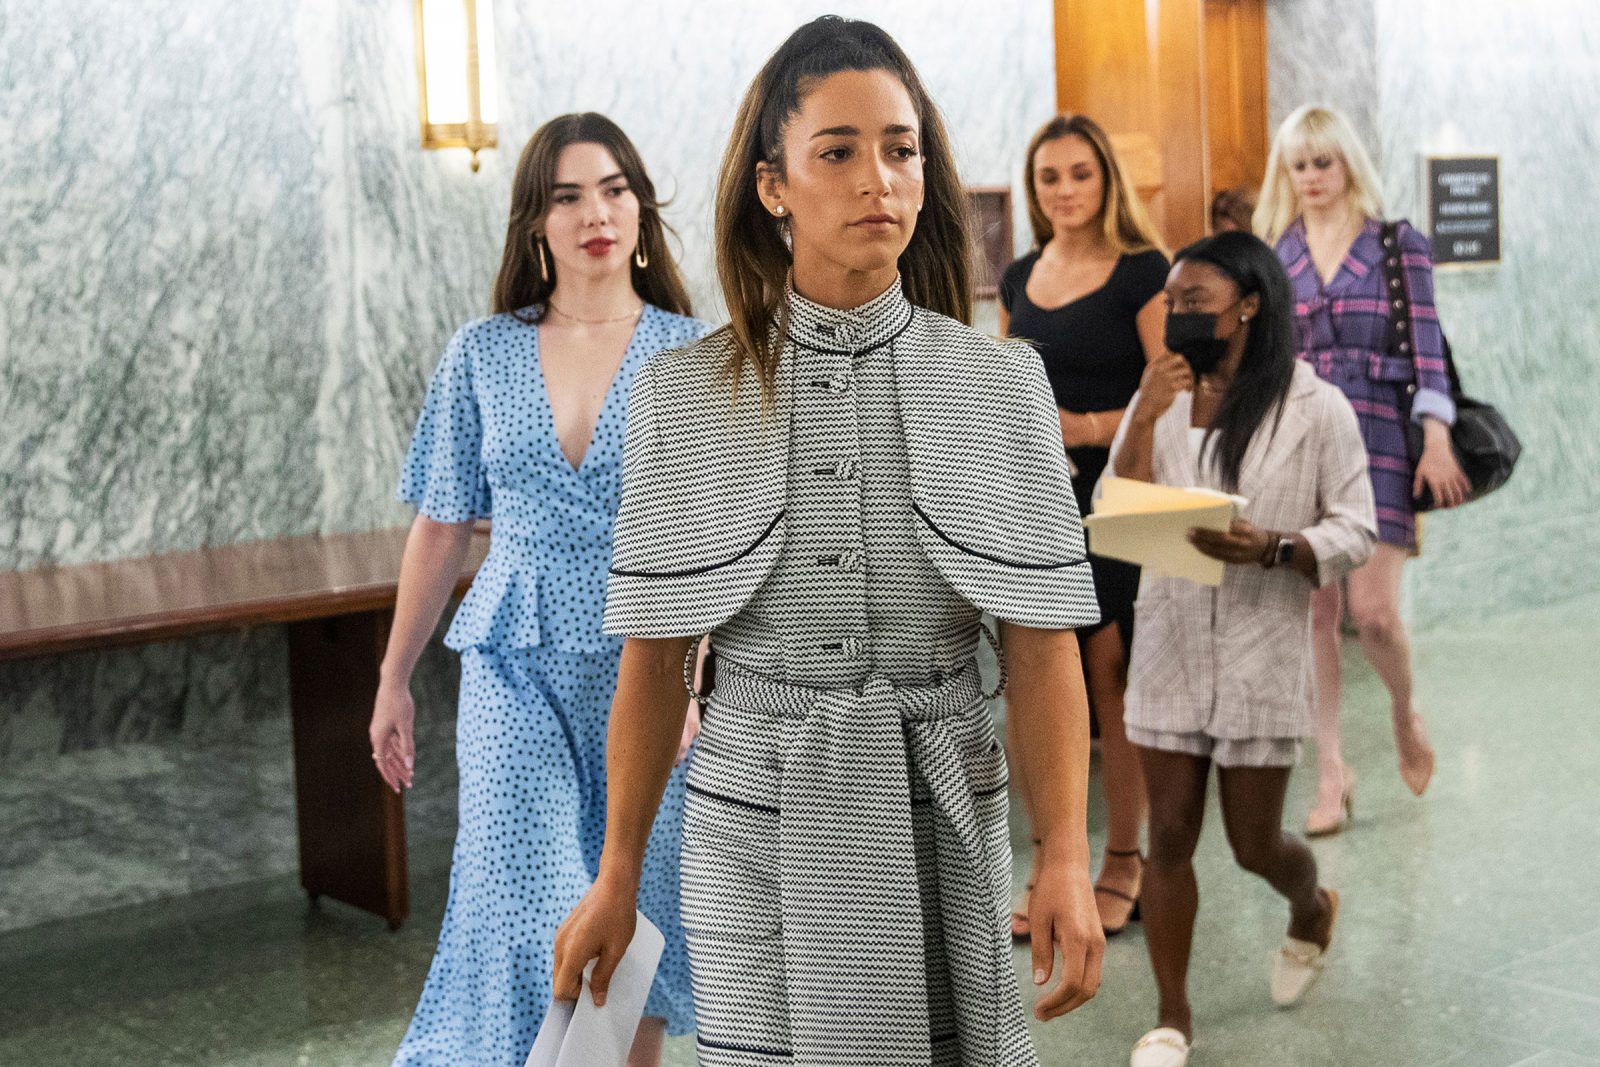 Former U.S. Olympic gymnasts Aly Raisman, McKayla Maroney, Simone Biles, and Maggie Nichols arrive for the Senate Judiciary Committee hearing on Dereliction of Duty: Examining the Inspector General's Report on the FBI's Handling of the Larry Nassar Investigation on Capitol Hill in Washington, DC, September 15, 2021. (Shawn Thew—EFE/Shutterstock)